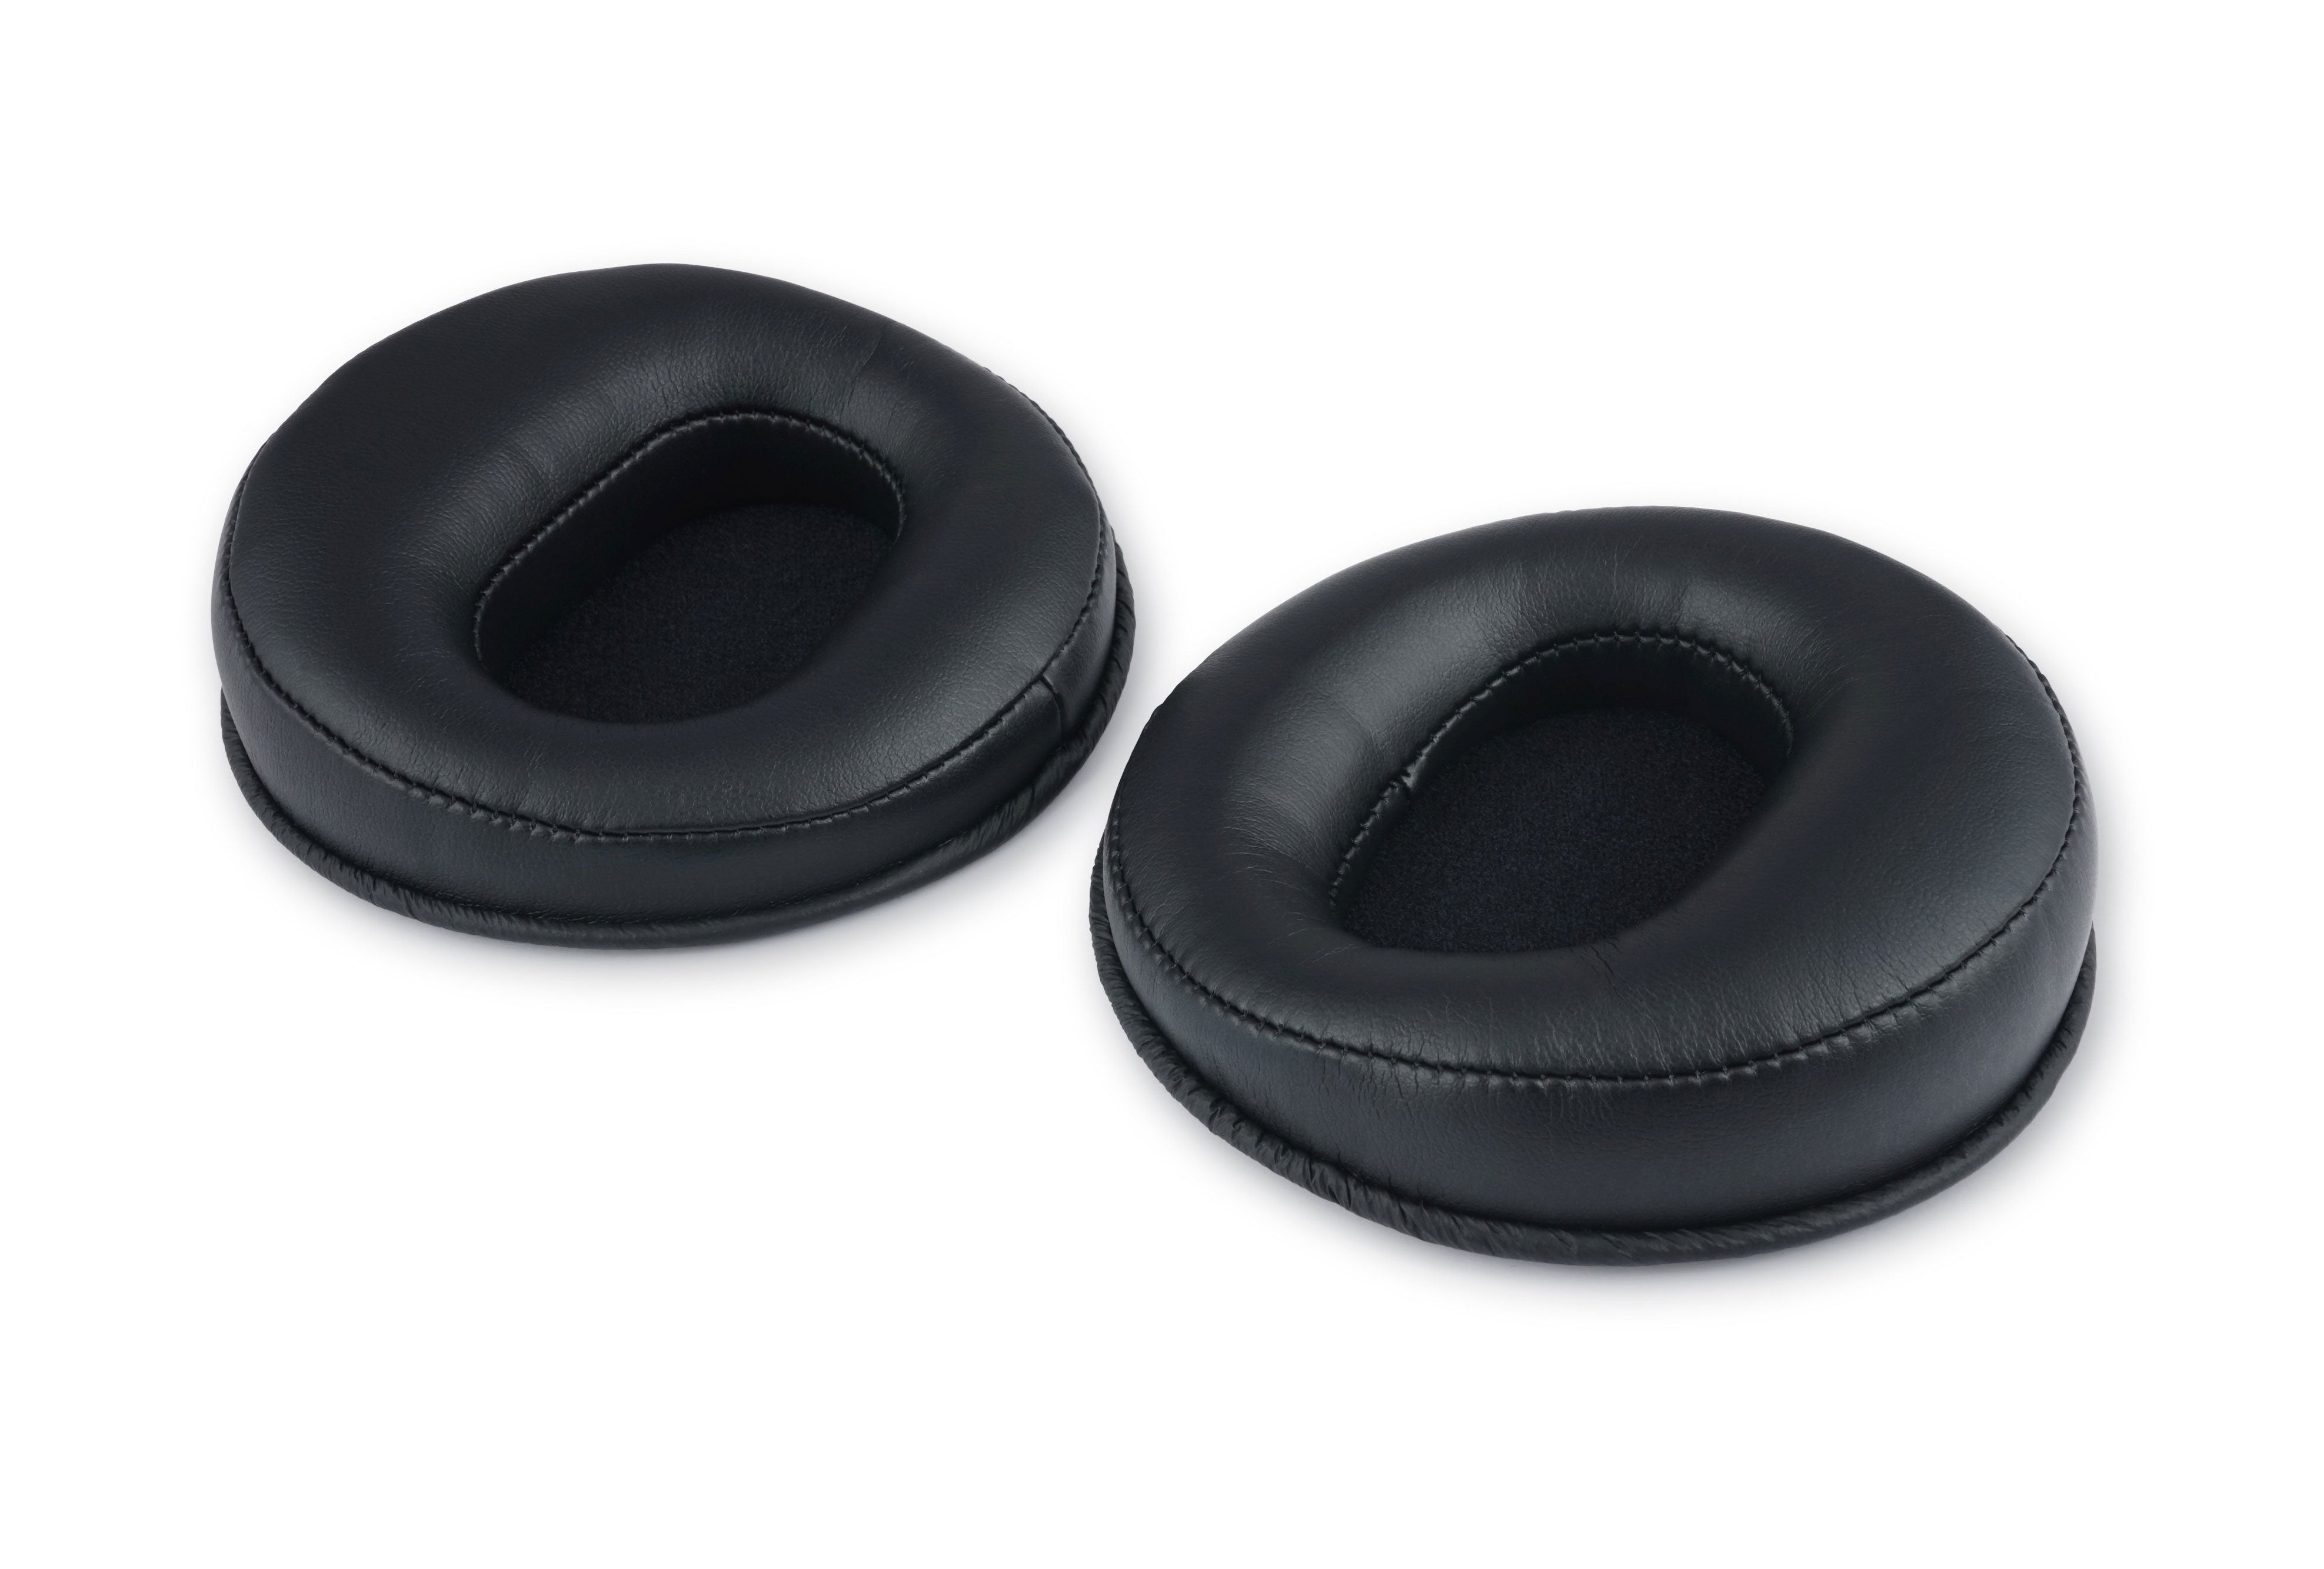 Fostex EX-EP-50 - Replacement Ear Pads for TH-500RP, TH-X00